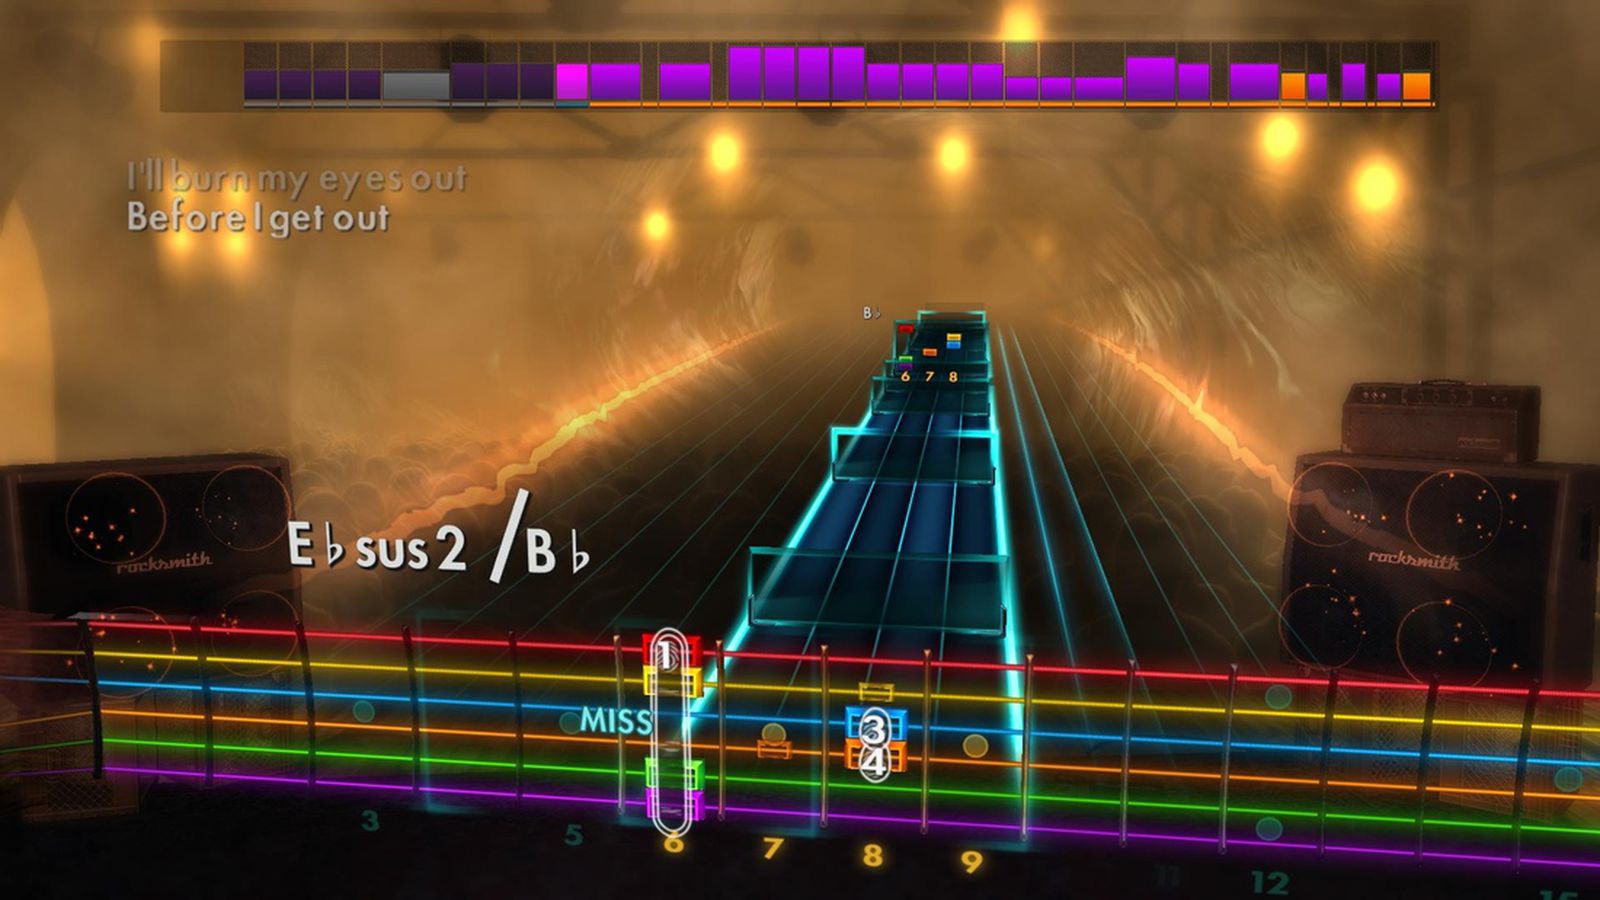 rocksmith 2014 for mac download